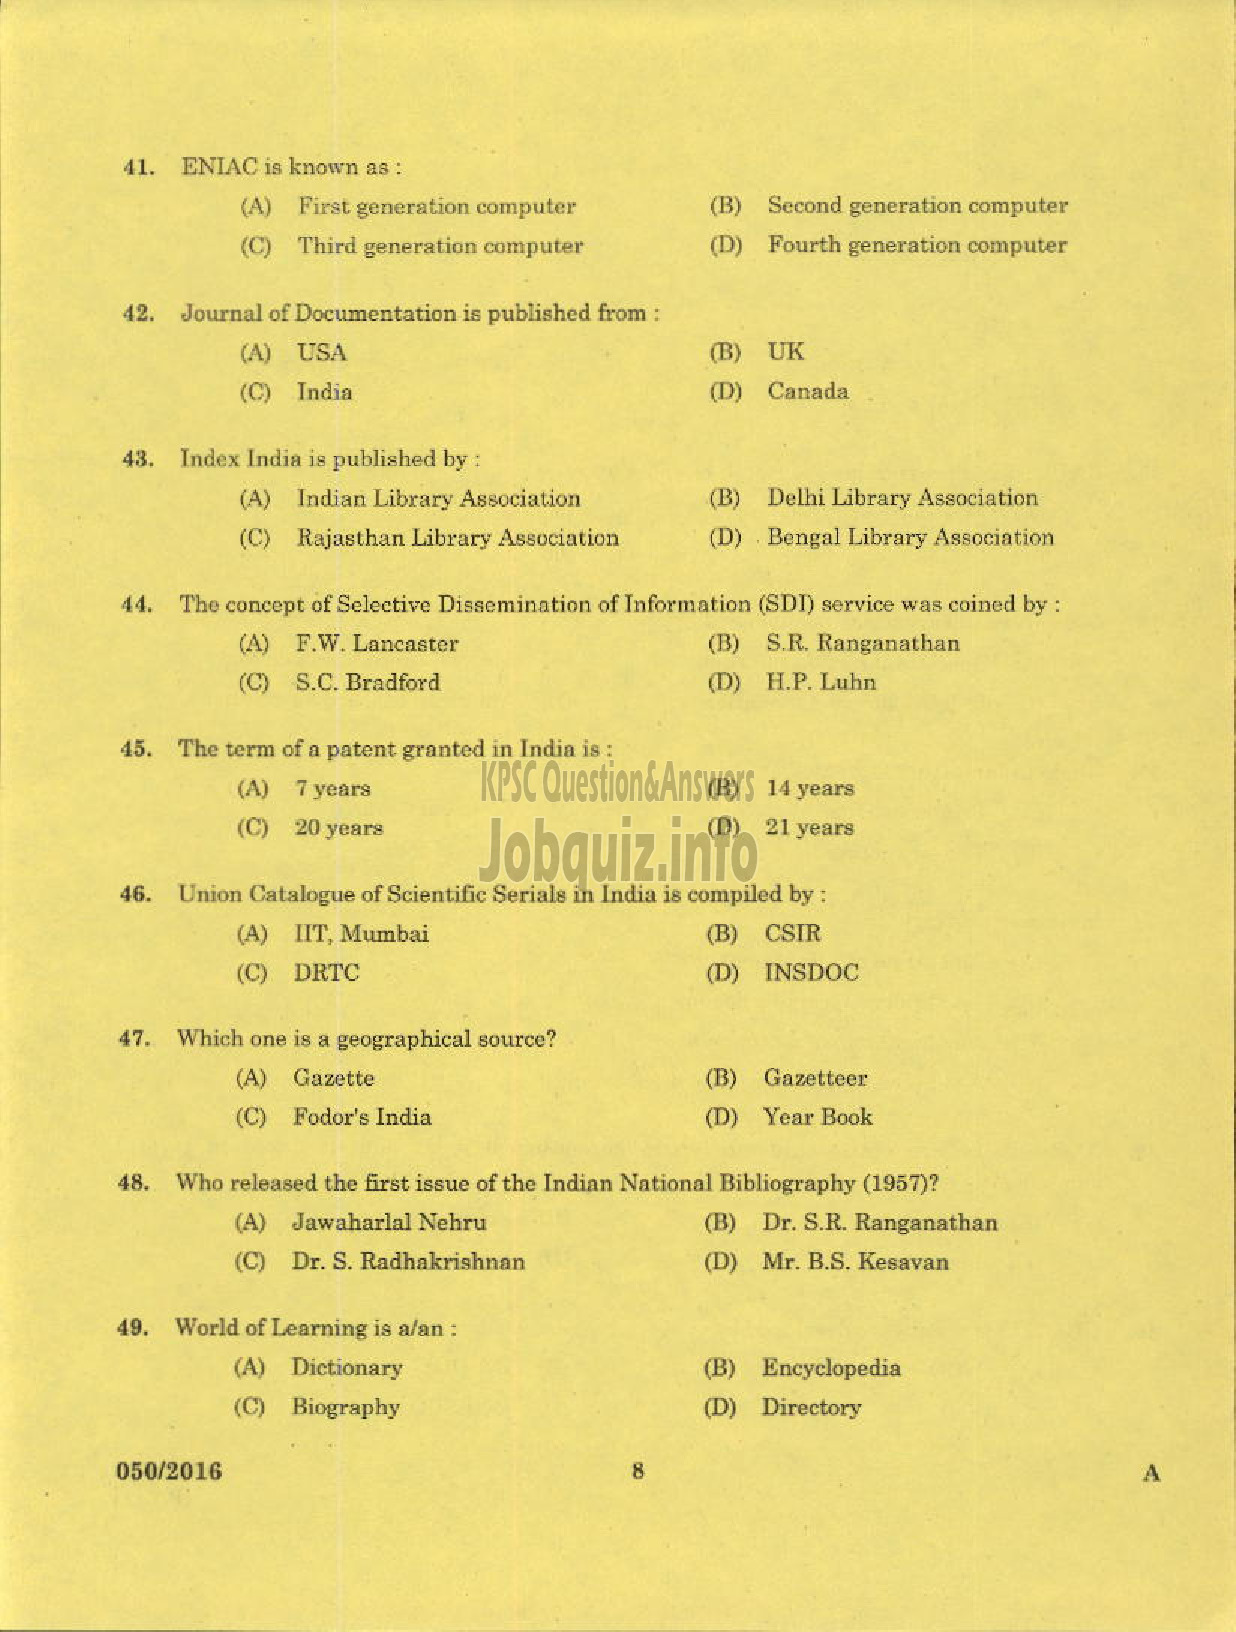 Kerala PSC Question Paper - LIBRARIAN GR IV KERALA STATE CENTRAL LIBRARY-6